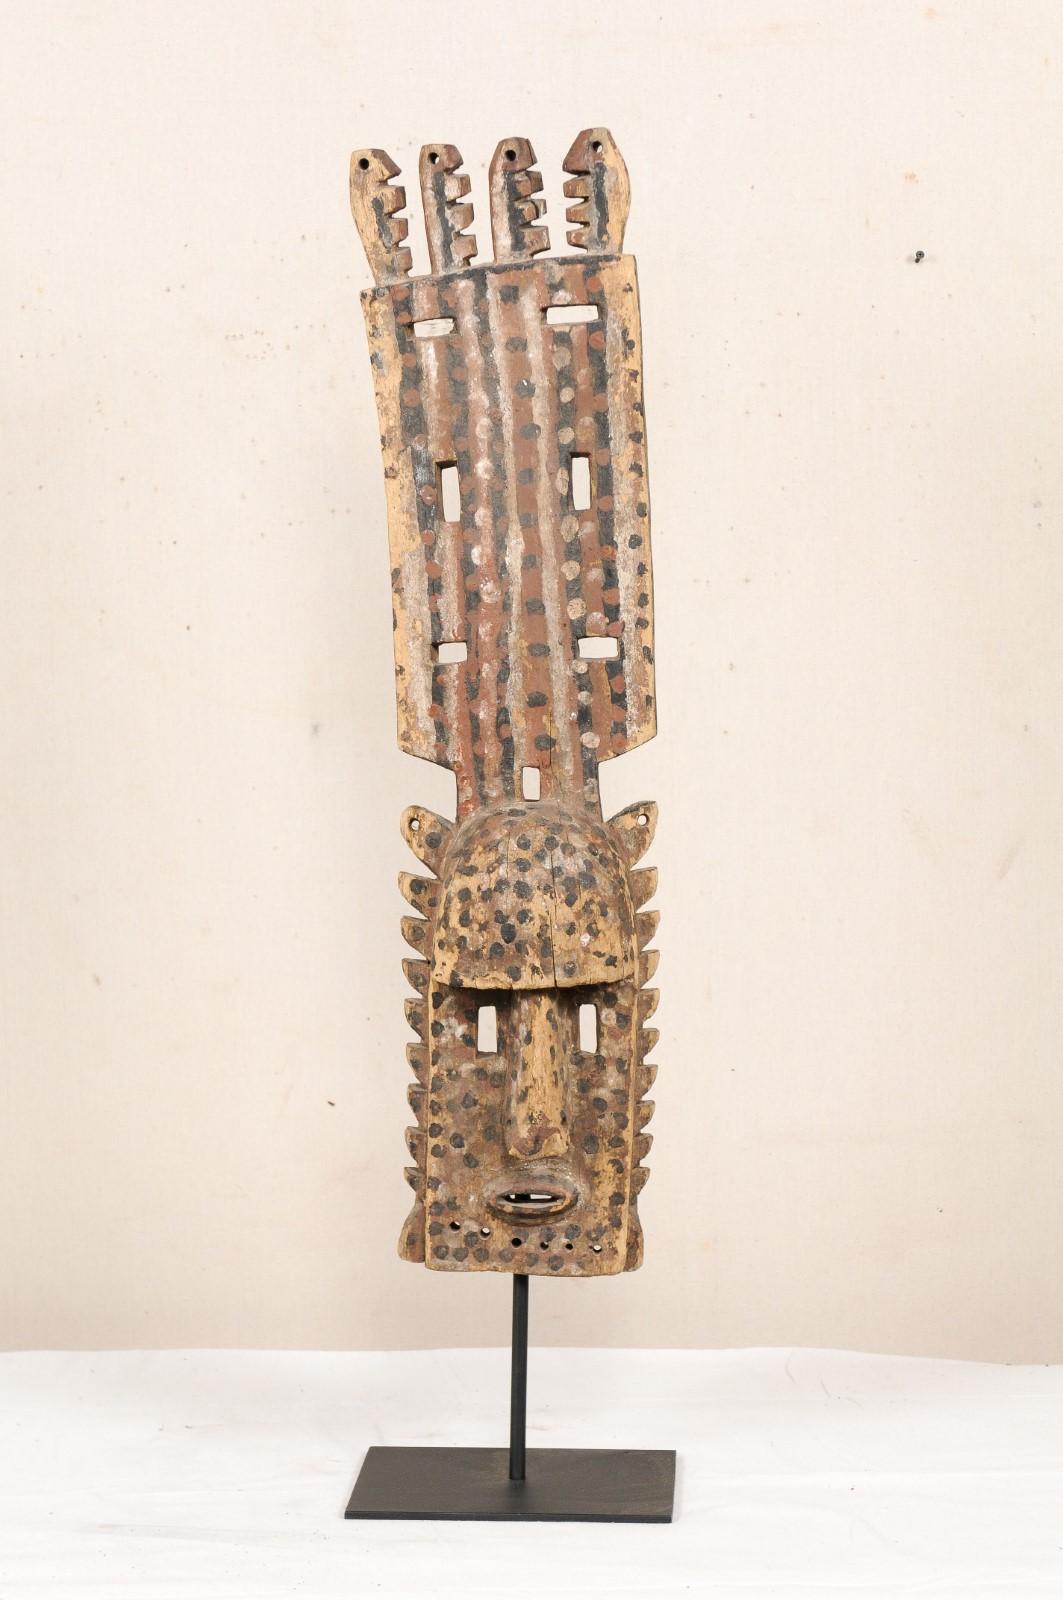 A Dogon Mali dance mask from the early to mid 20th century. This Dogon tribal wooden ceremonial dance mask originates from Mali, West Africa. The mask is carved and features a face with raised head-dress, adorn with pierced triangular-shaped